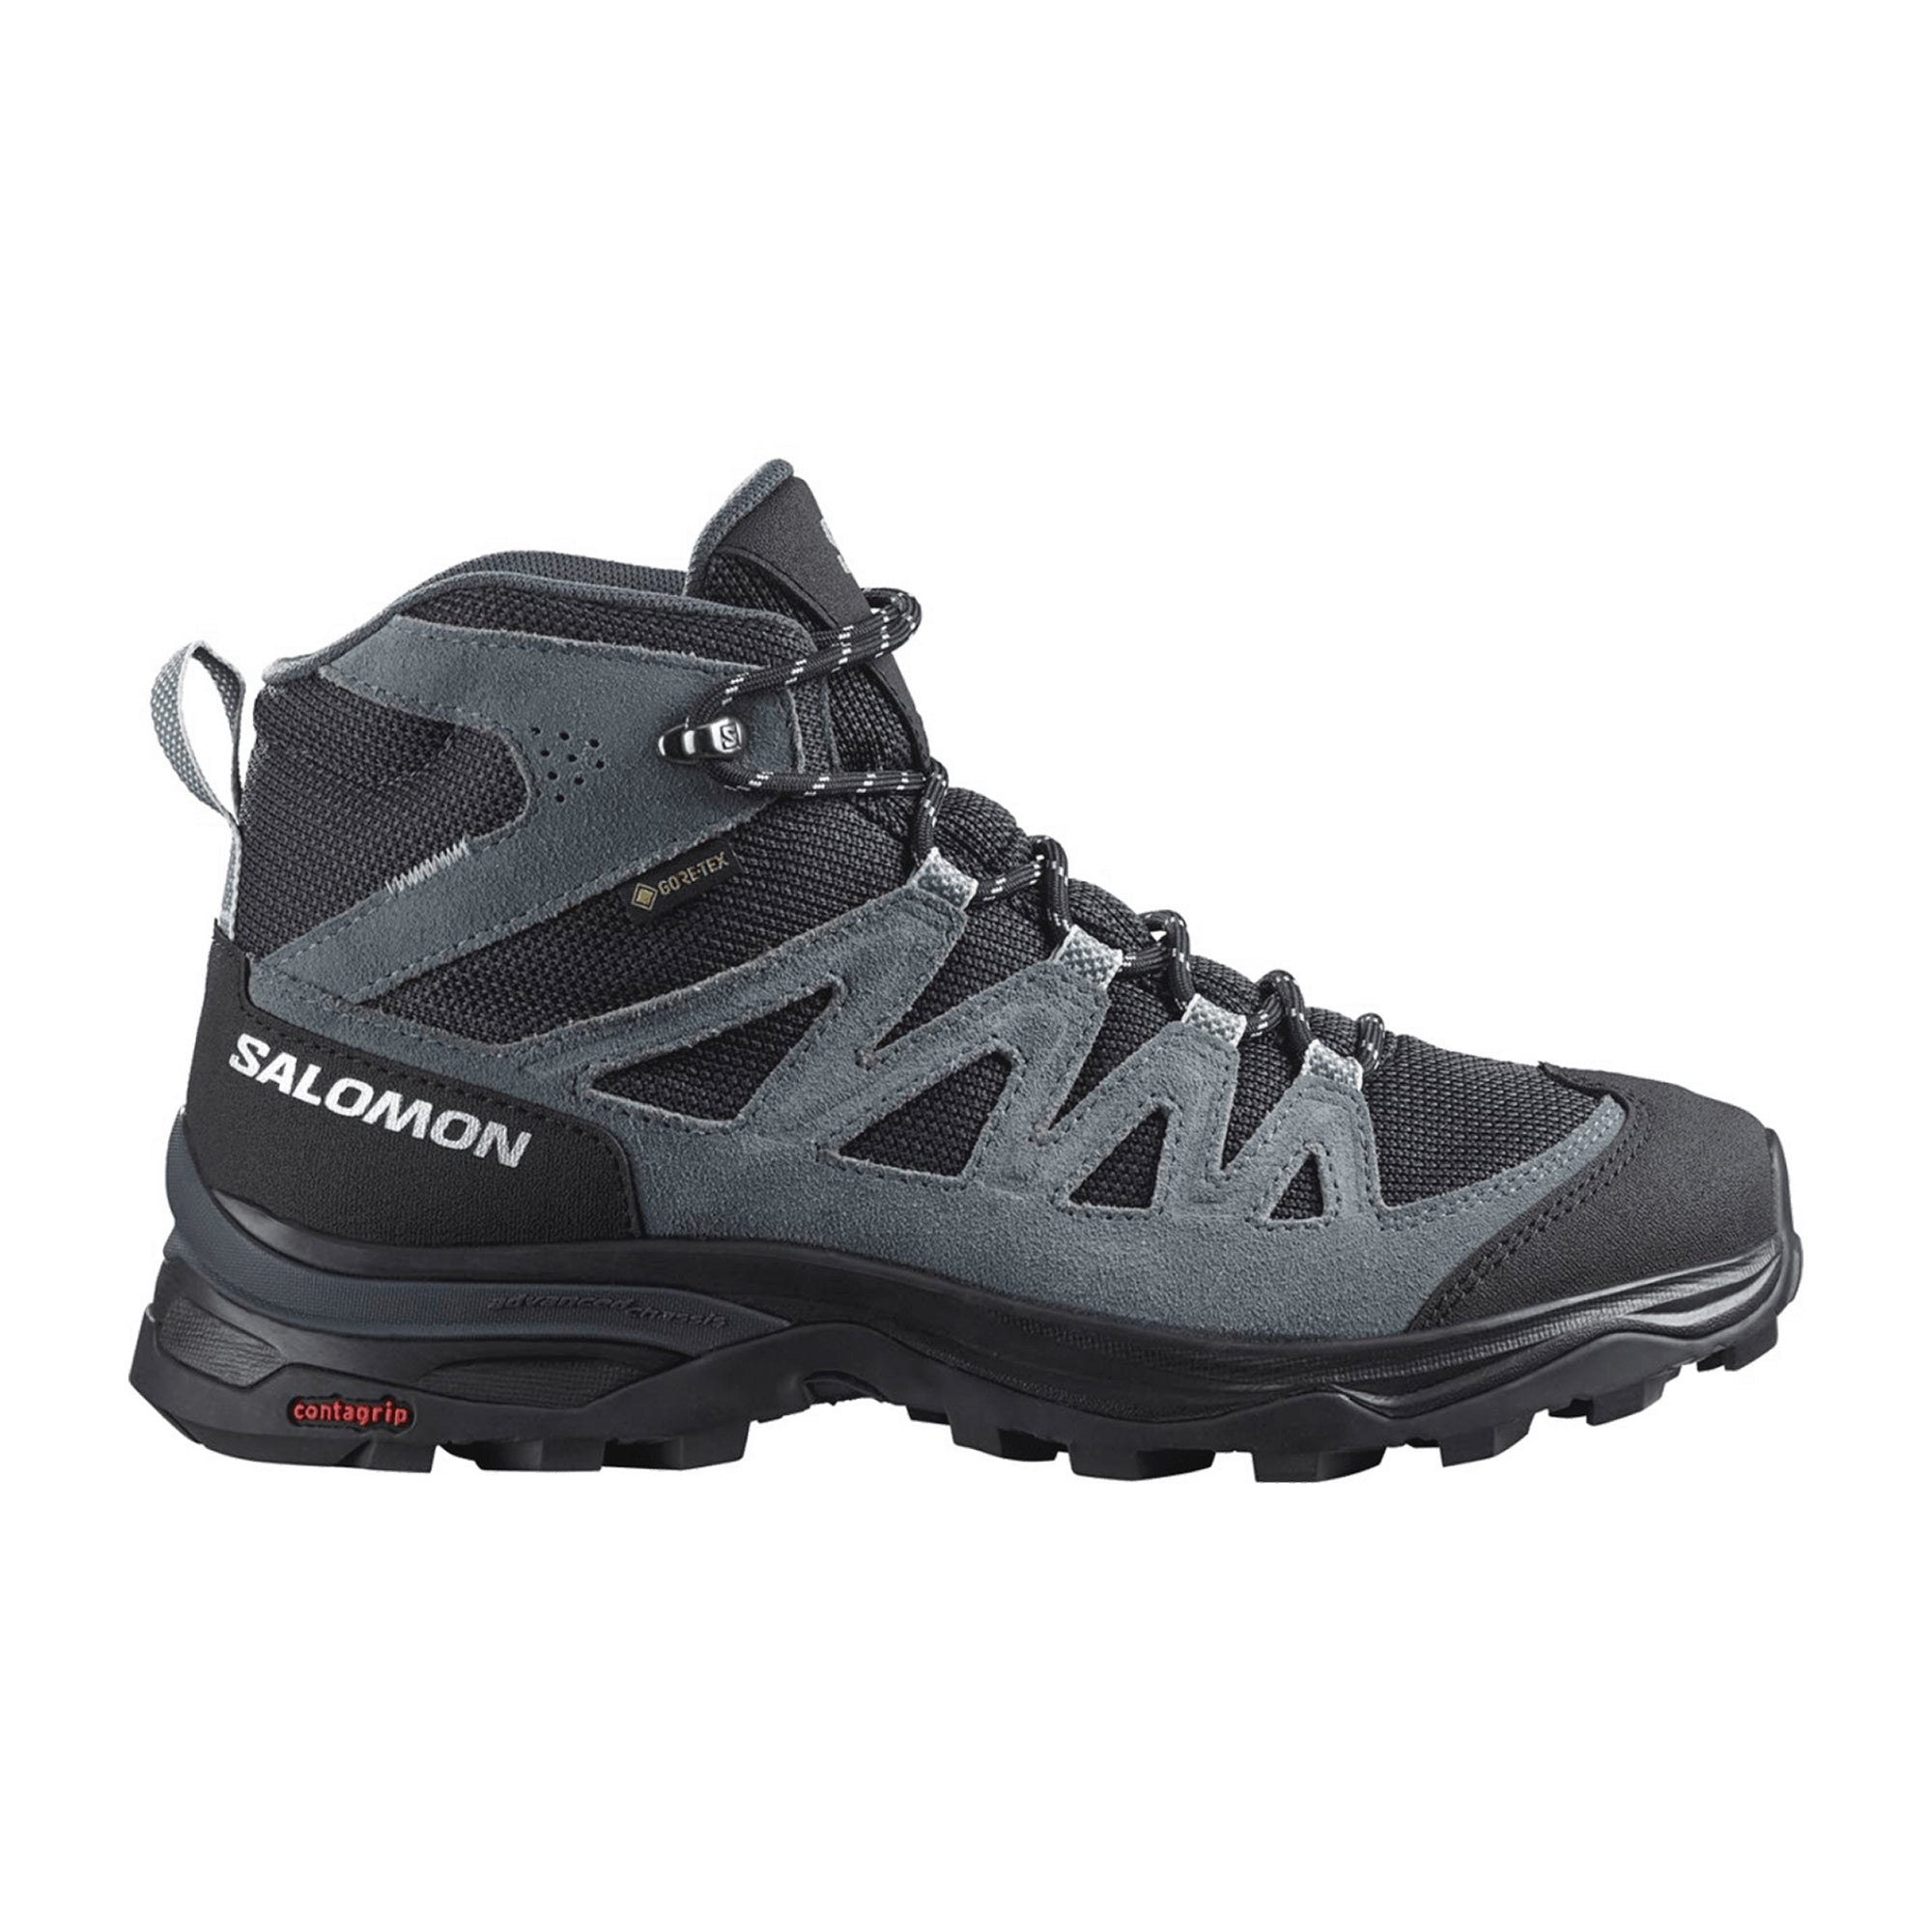 Salomon shoes X WARD LEATHER MID GTX W Ind for women, gray